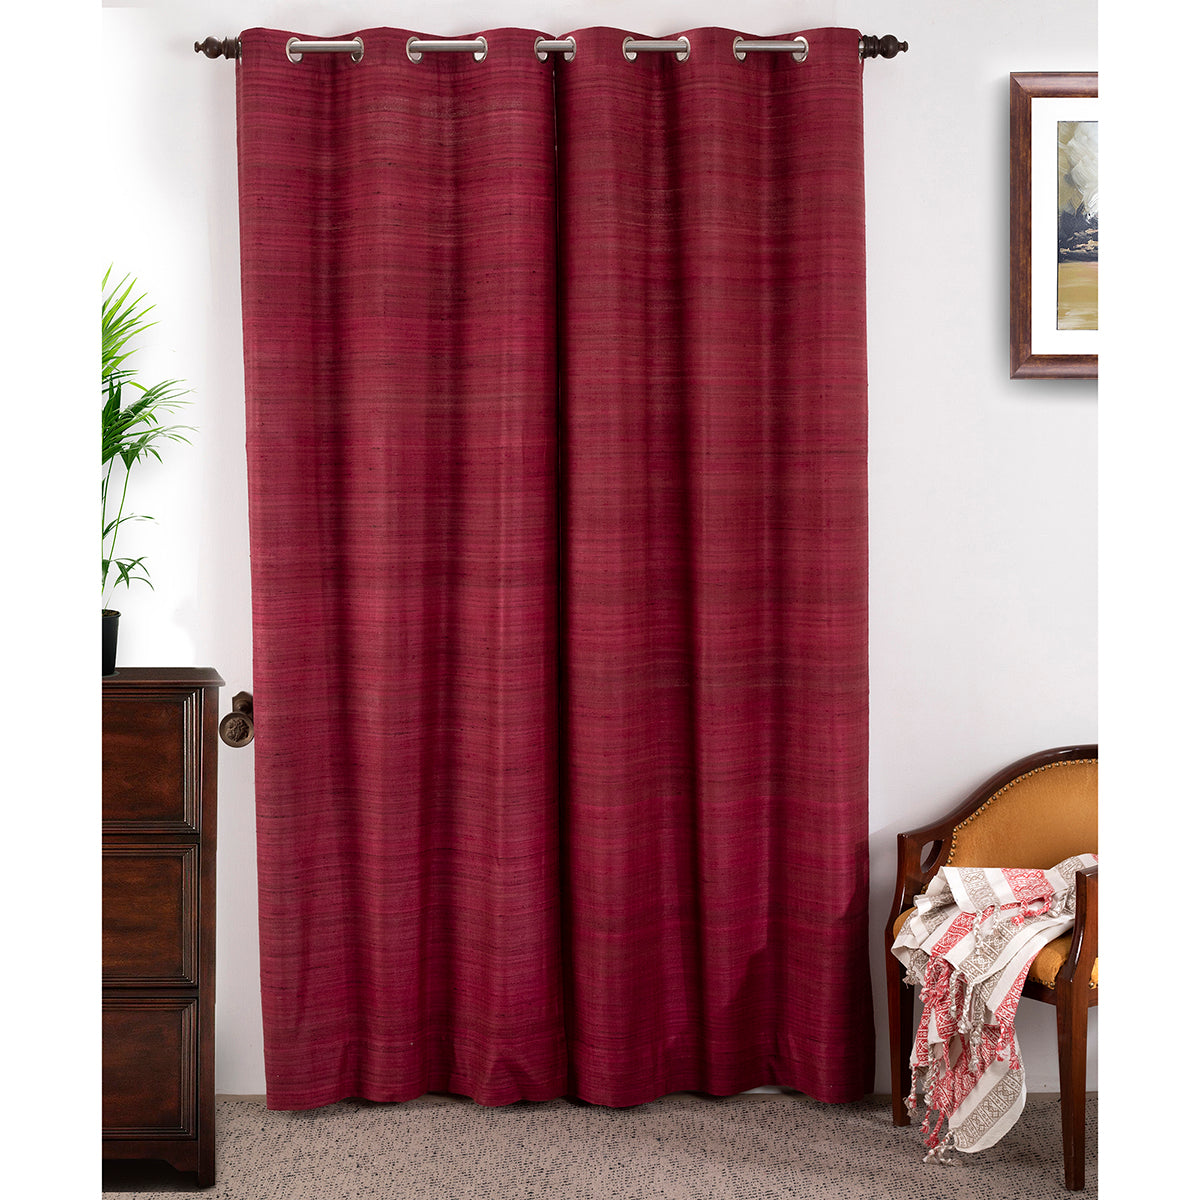 Hickory Silk Solid 2PC Red Curtain Set